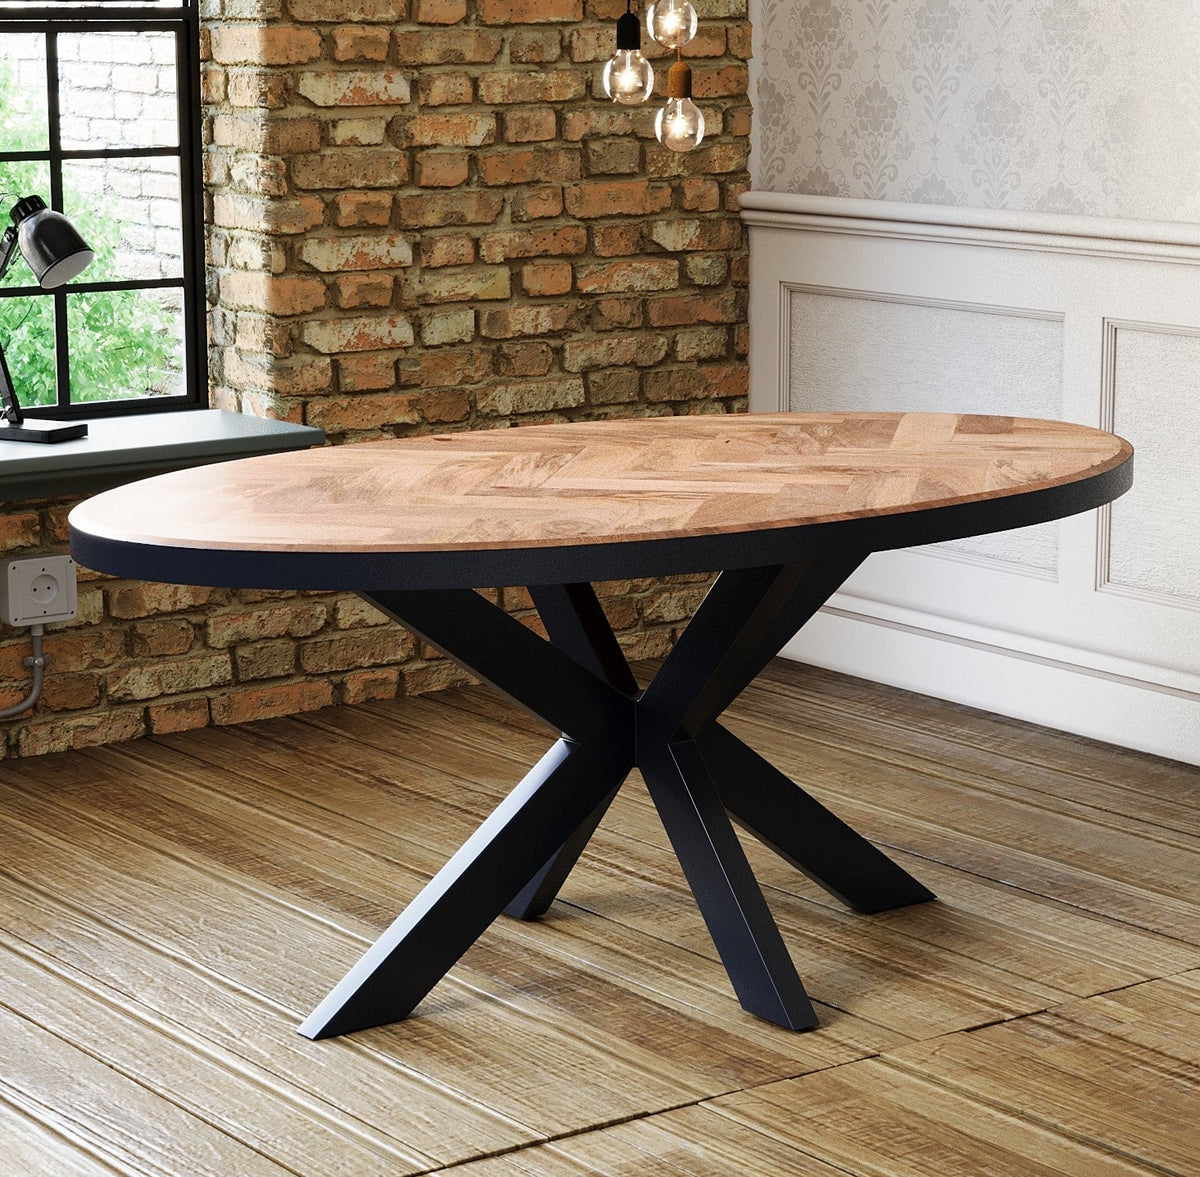 Oval Solid Wood Herringbone Dining Table | Black Iron Spider Base - 160cms Casa Maria Designs 